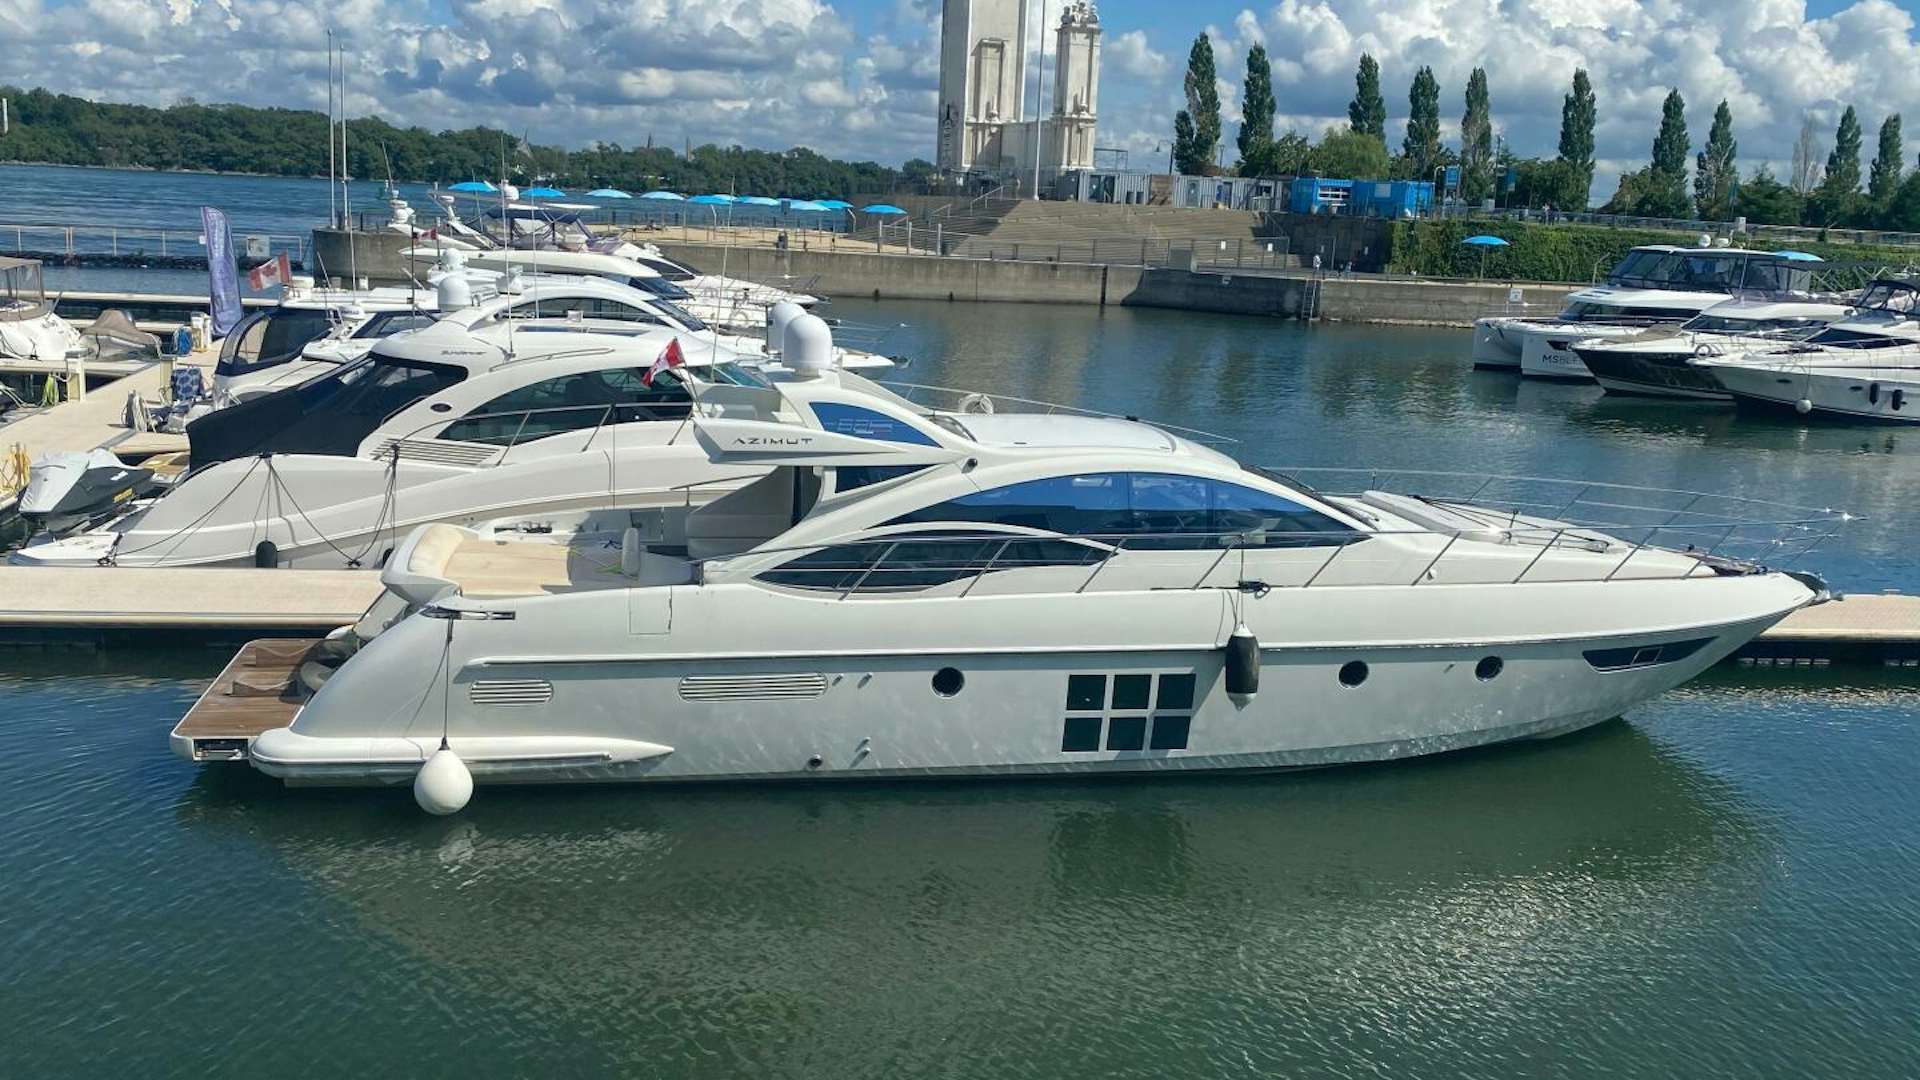 Living
Yacht for Sale